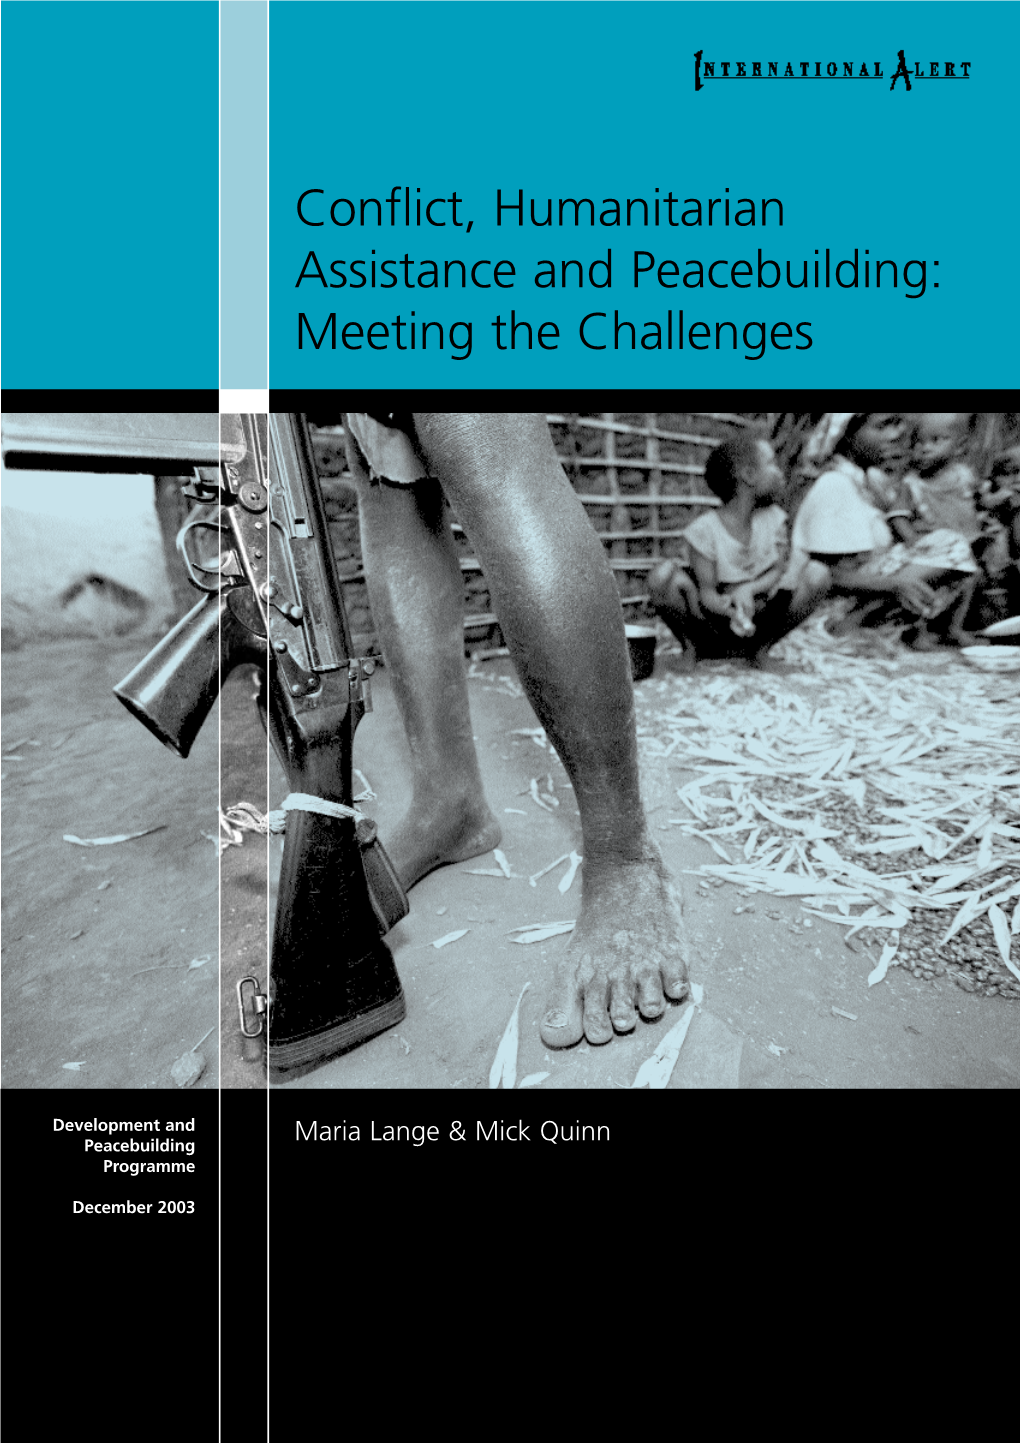 Conflict, Humanitarian Assistance and Peacebuilding: Meeting the Challenges